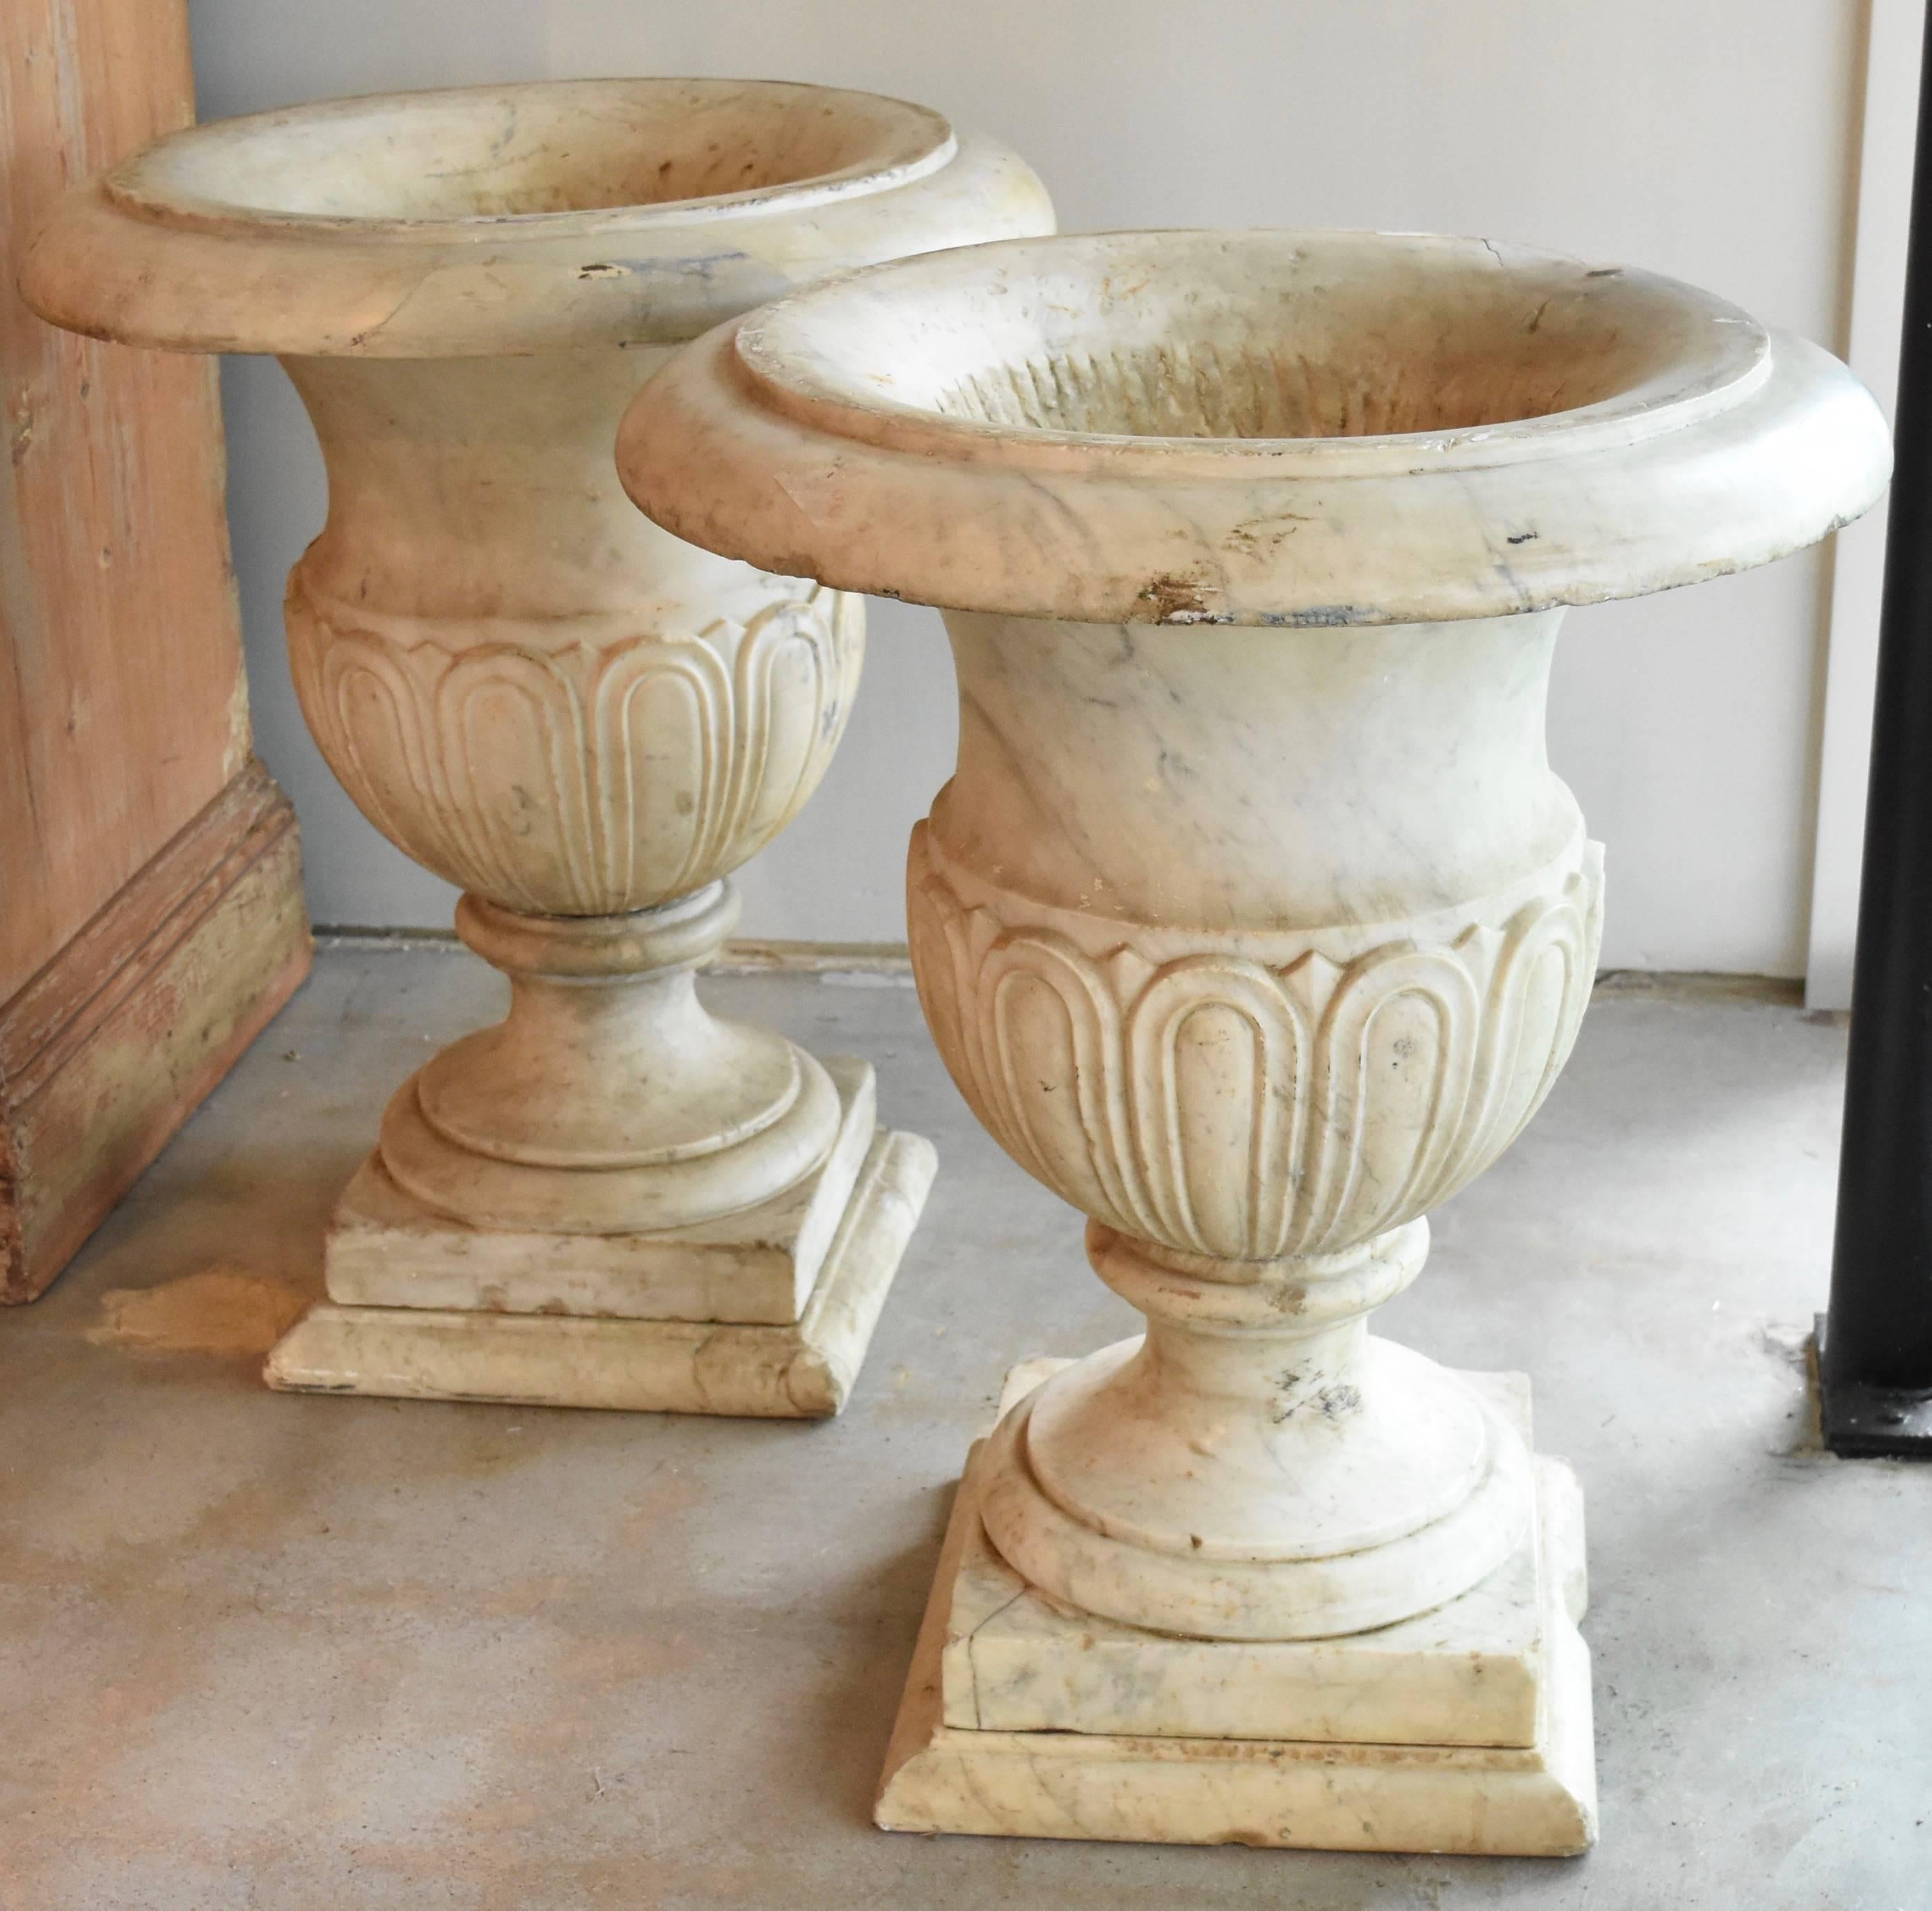 Lovely Carrara marble urns from Italy make any home elegant. They are white with gray veining. There are some minor chips and repaired breaks from age and moving, but it doesn't take away from its beauty at all.